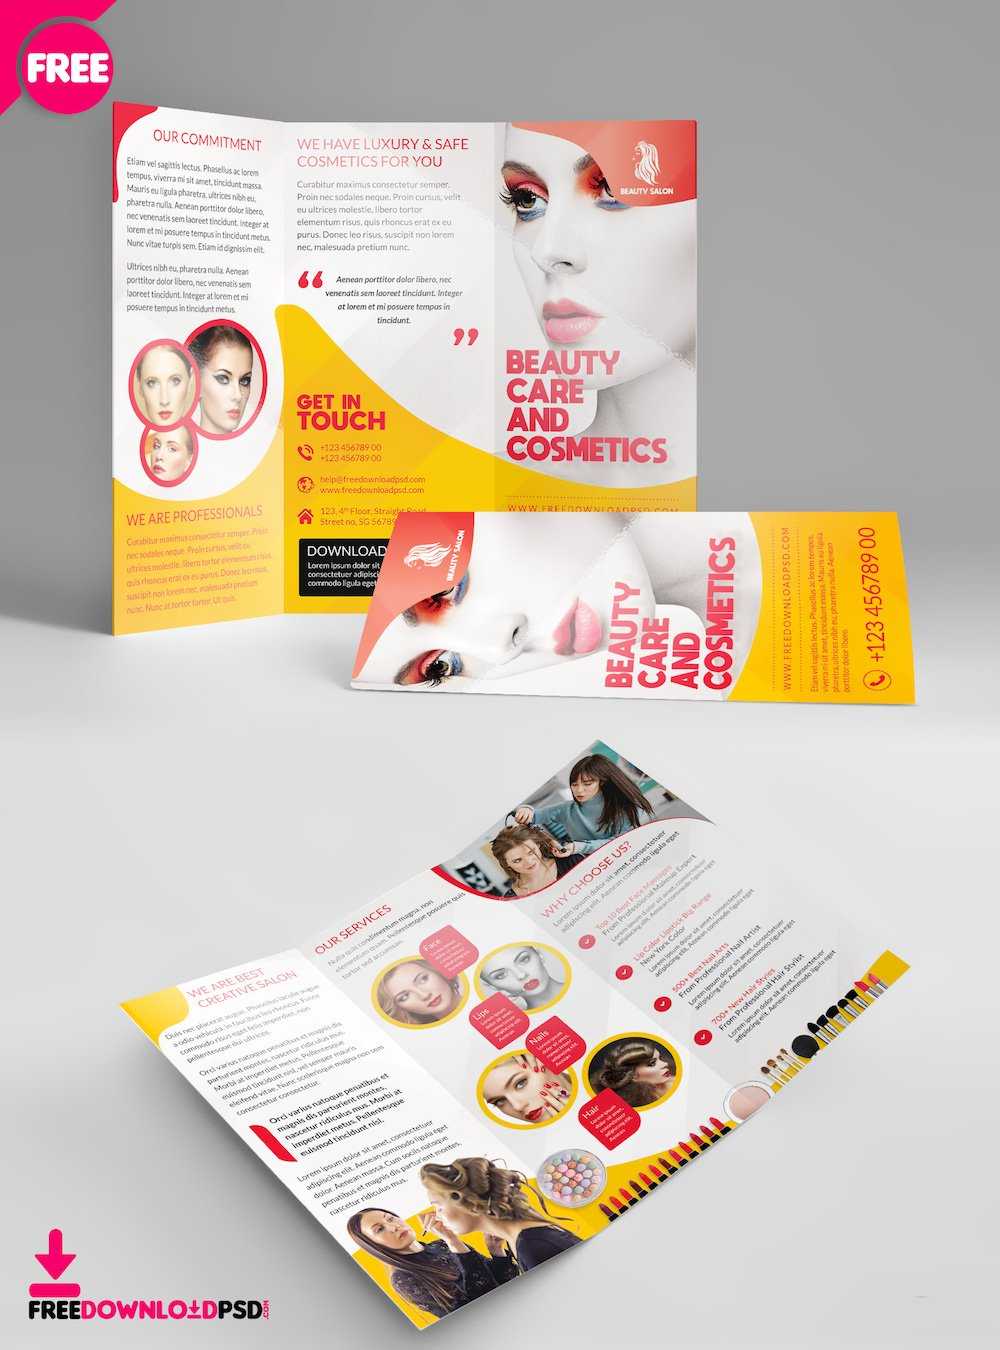 34 Best Free Brochure Mockups & Psd Templates 2019 - Colorlib With Single Page Brochure Templates Psd